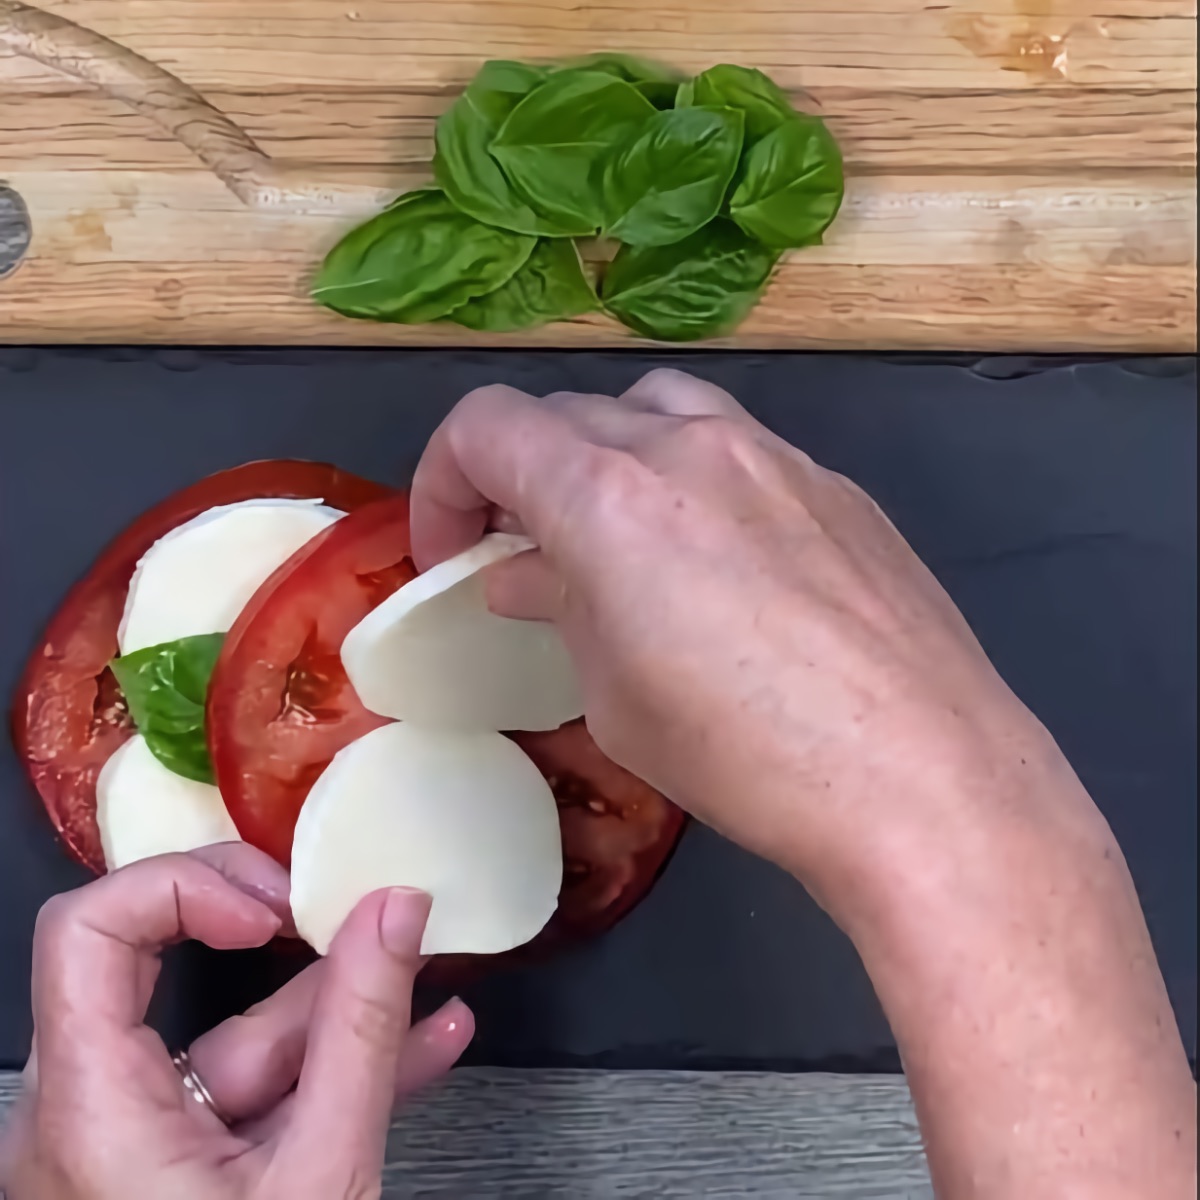 Assembling the Caprese Salad by alternating layers of tomato, mozzarella, and basil.